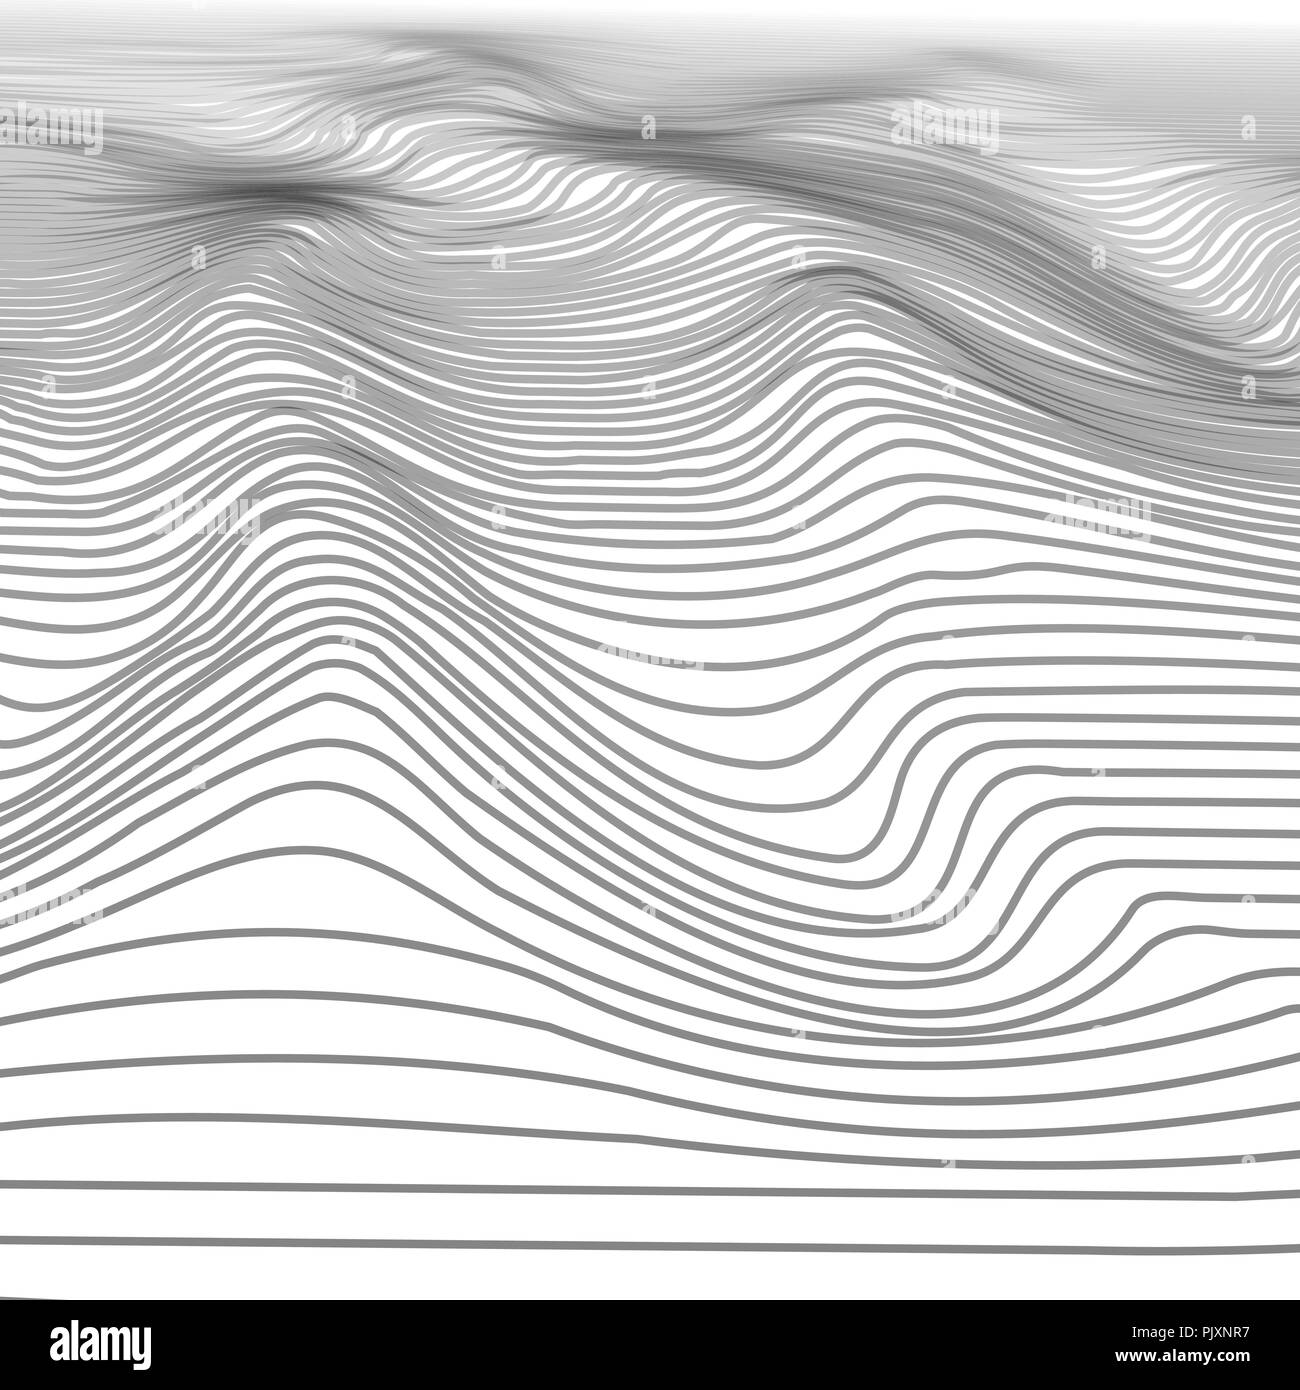 Abstract Wavy Stripe Wireframe Background. Digital Cyberspace Mountains with Valleys. 3D Technology Illustration Landscape. Vector Stock Vector